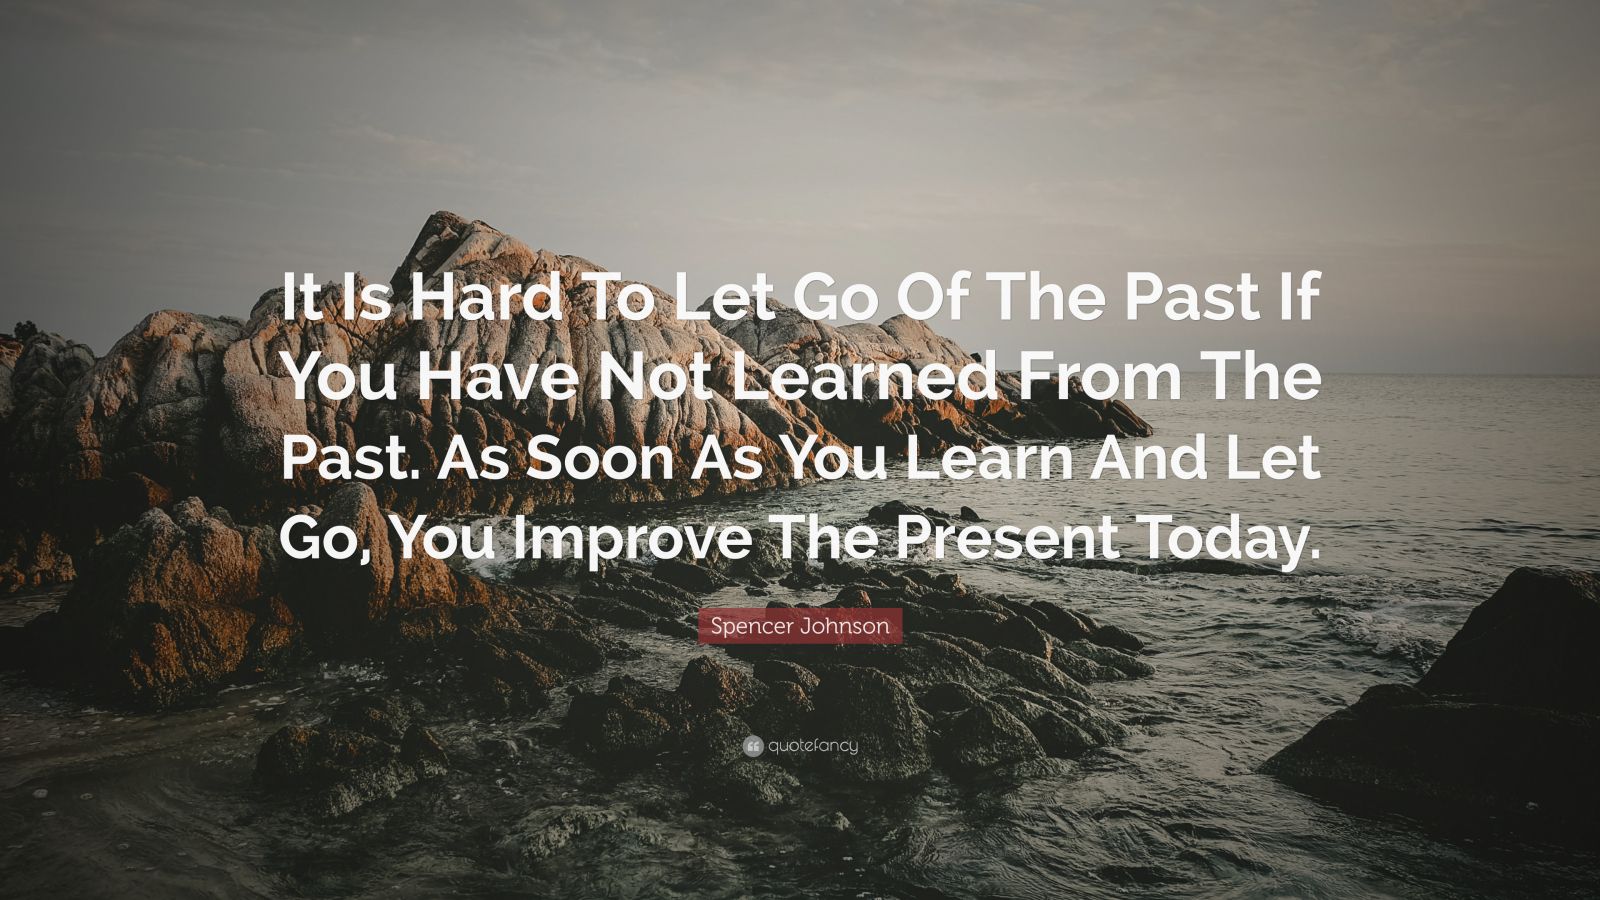 How to learn the lessons of the past and let them go